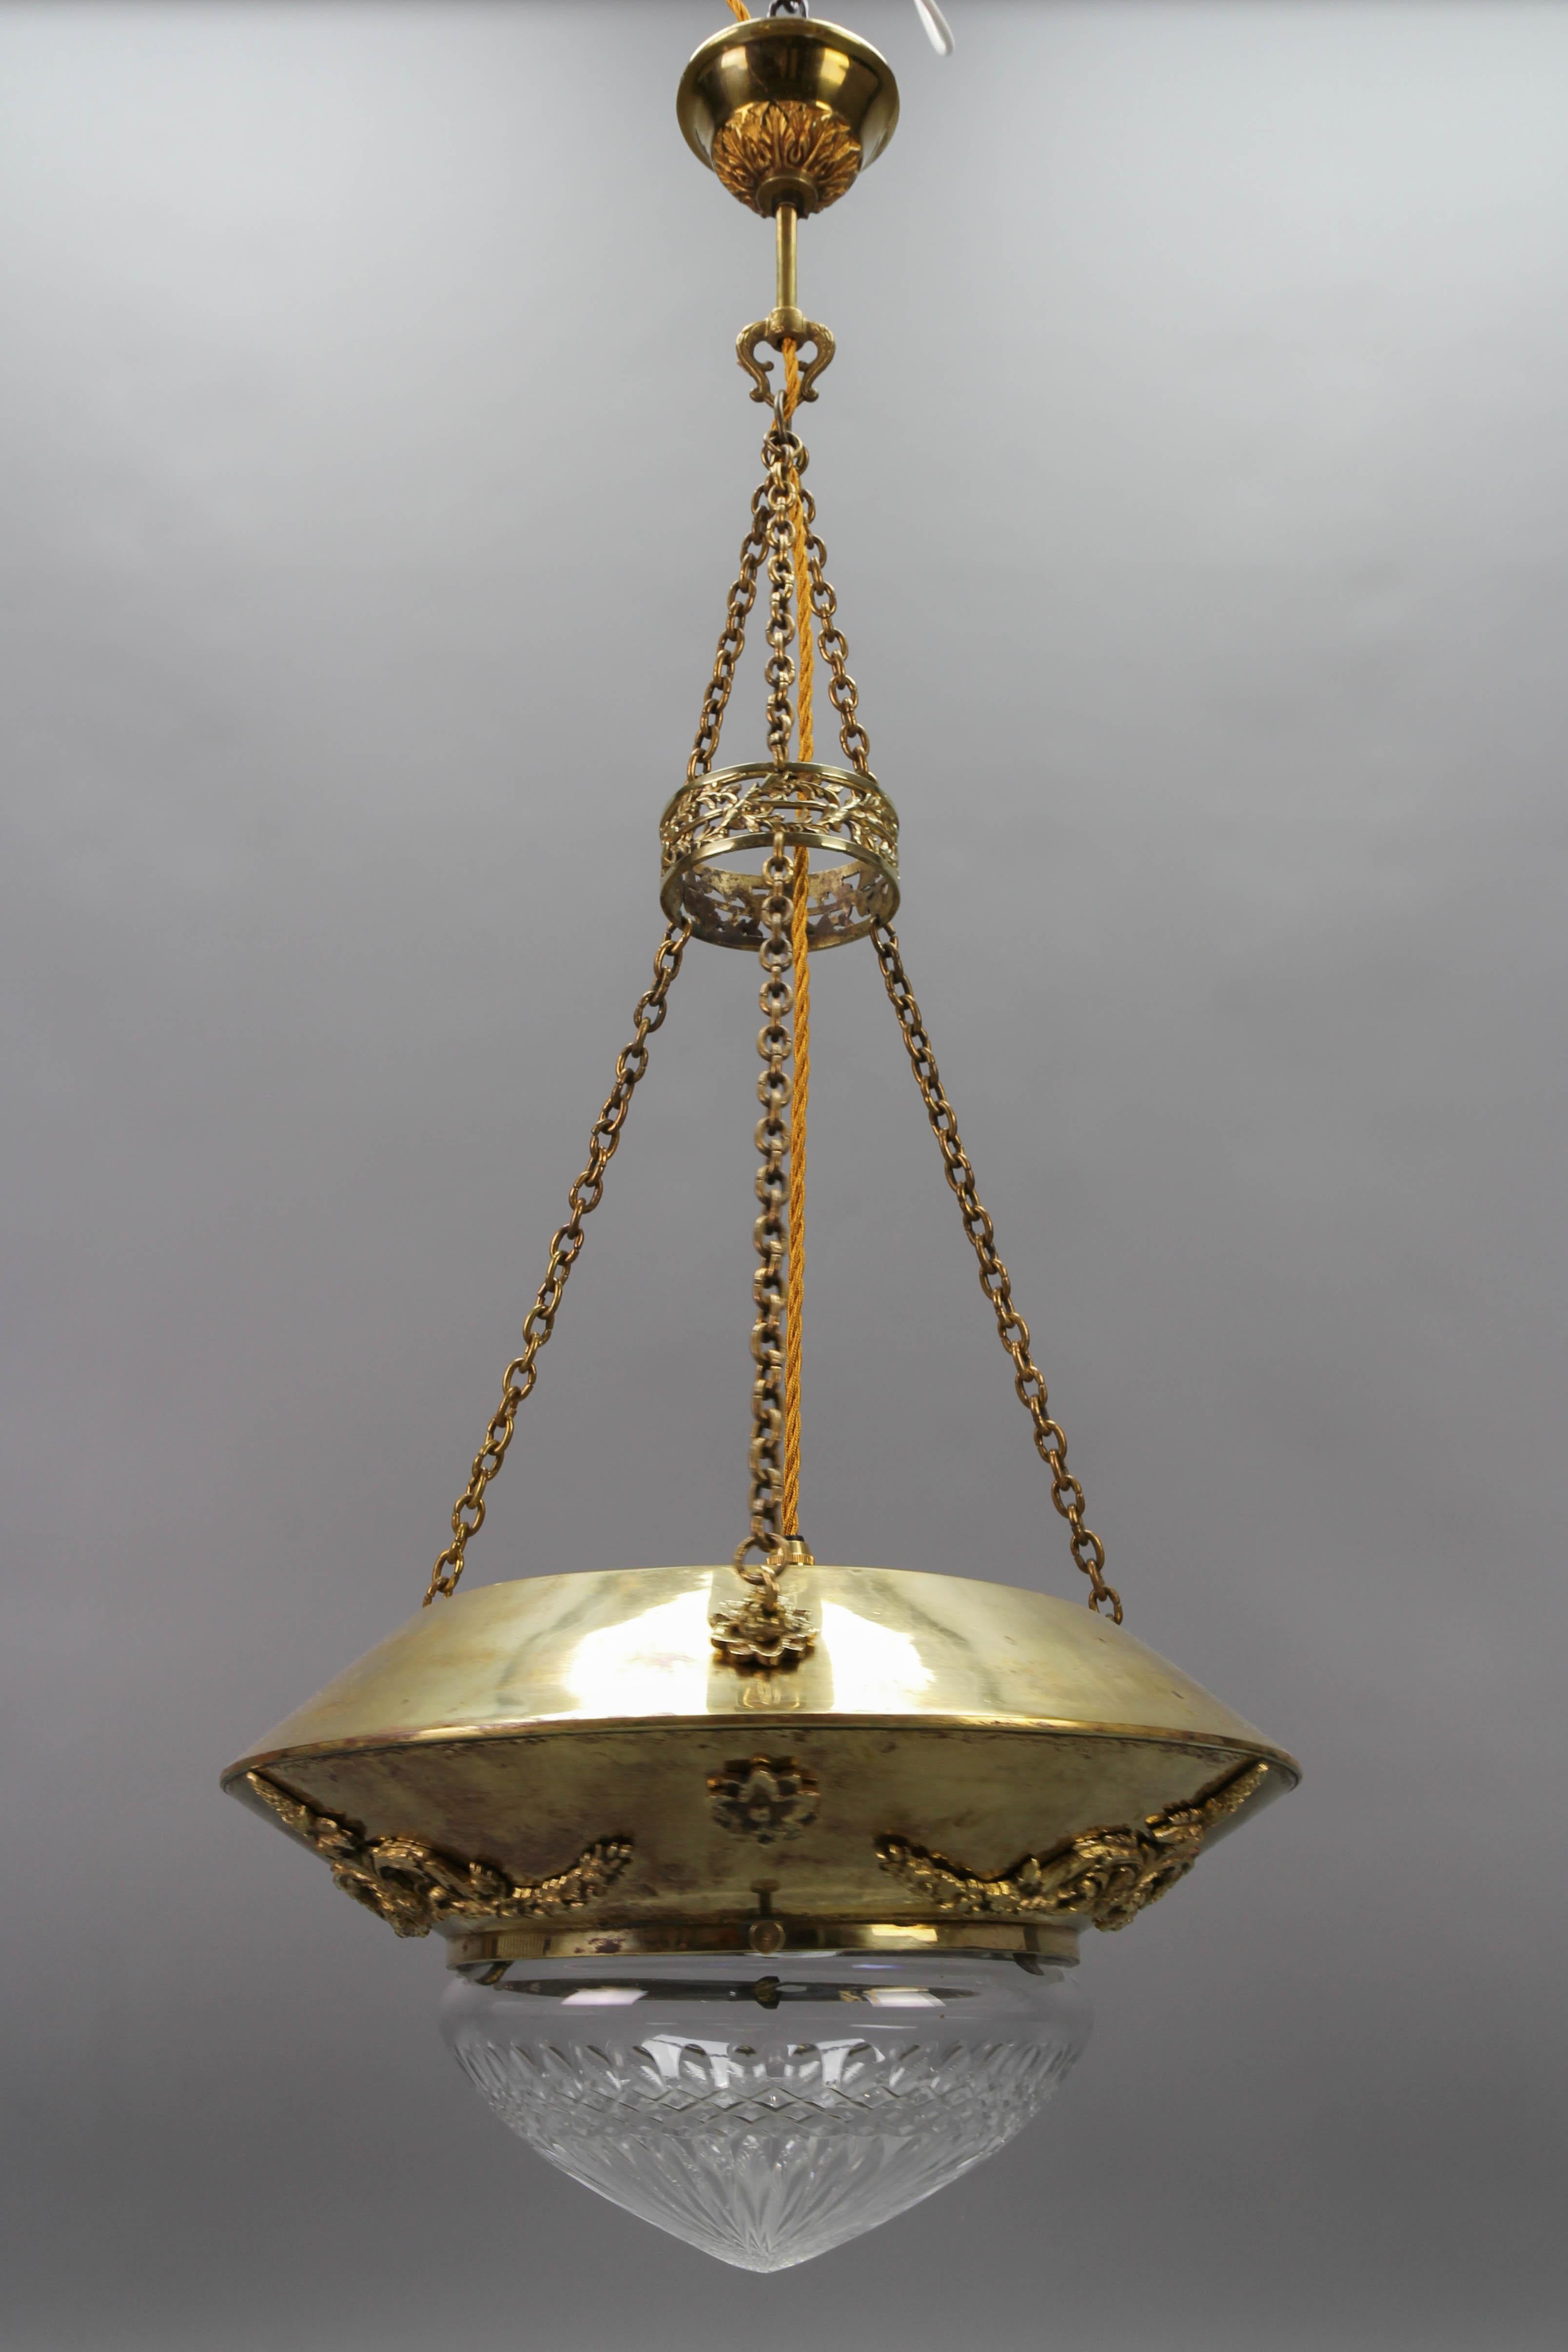 Antique French brass and bronze pendant light with cut glass lampshade from the circa 1900.
This beautiful antique neoclassical style pendant light features a brass body adorned with bronze decors and hung on three chains, a beautifully shaped